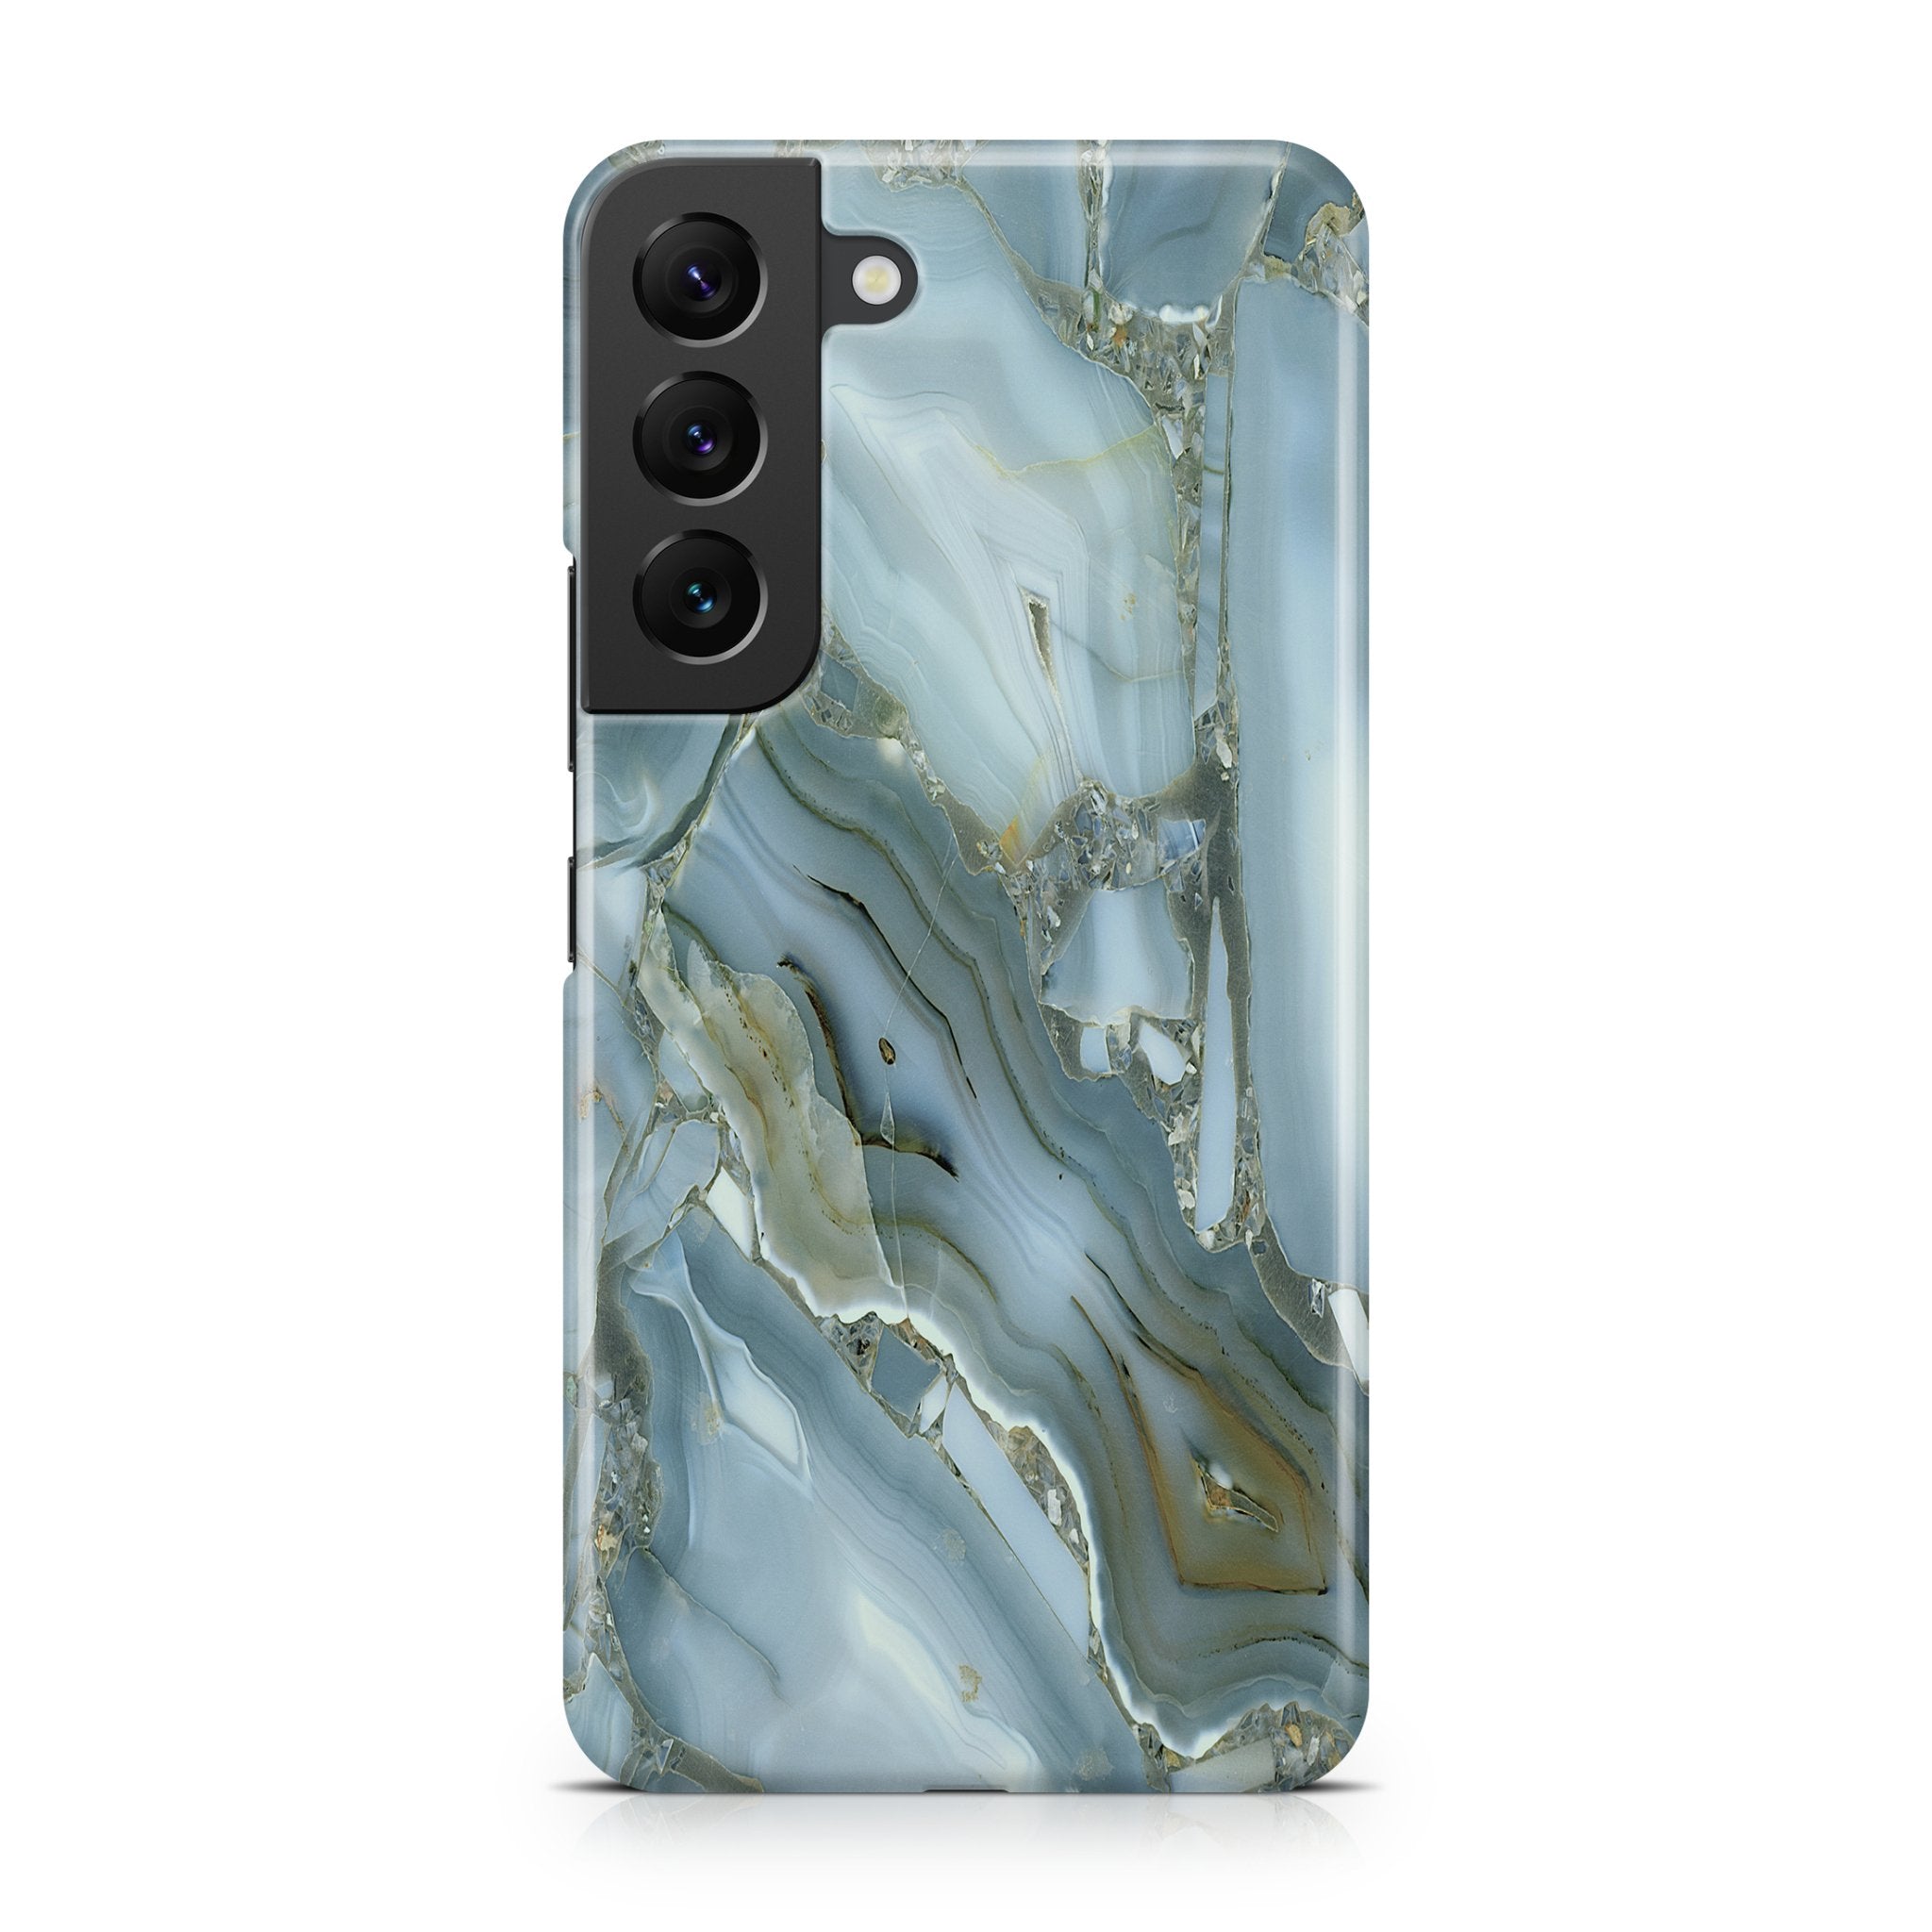 Blue Agate - Samsung phone case designs by CaseSwagger